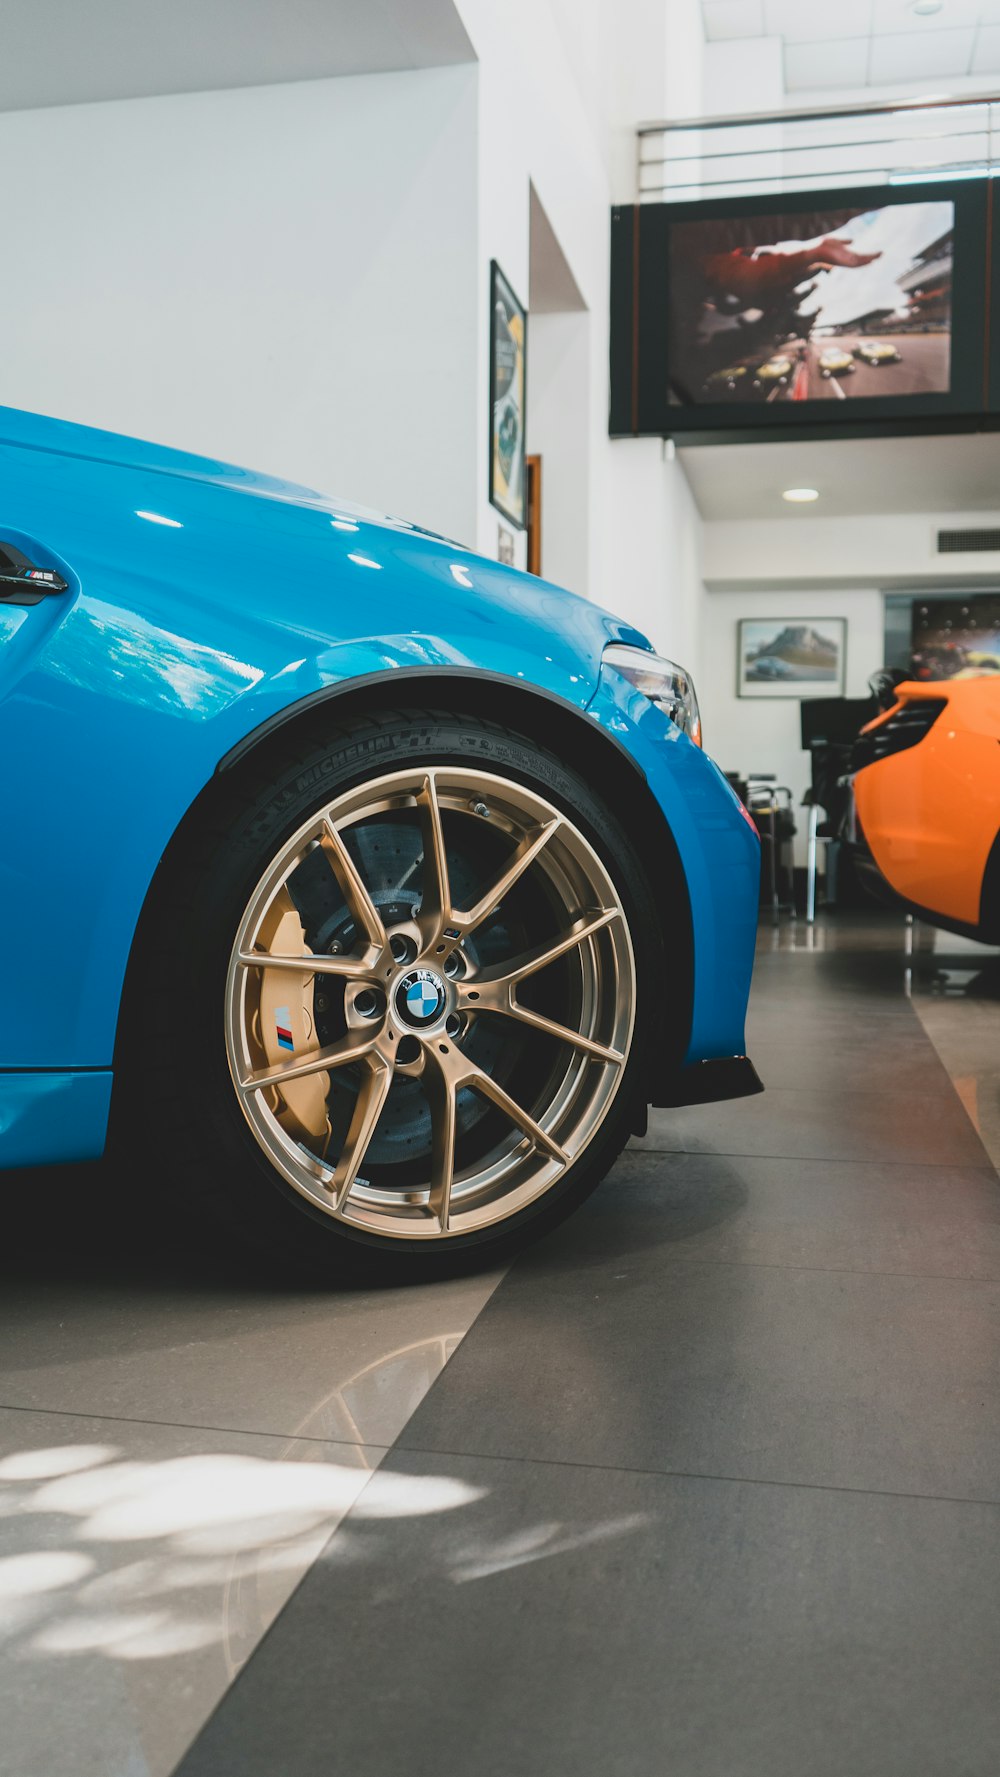 a blue sports car parked in a showroom